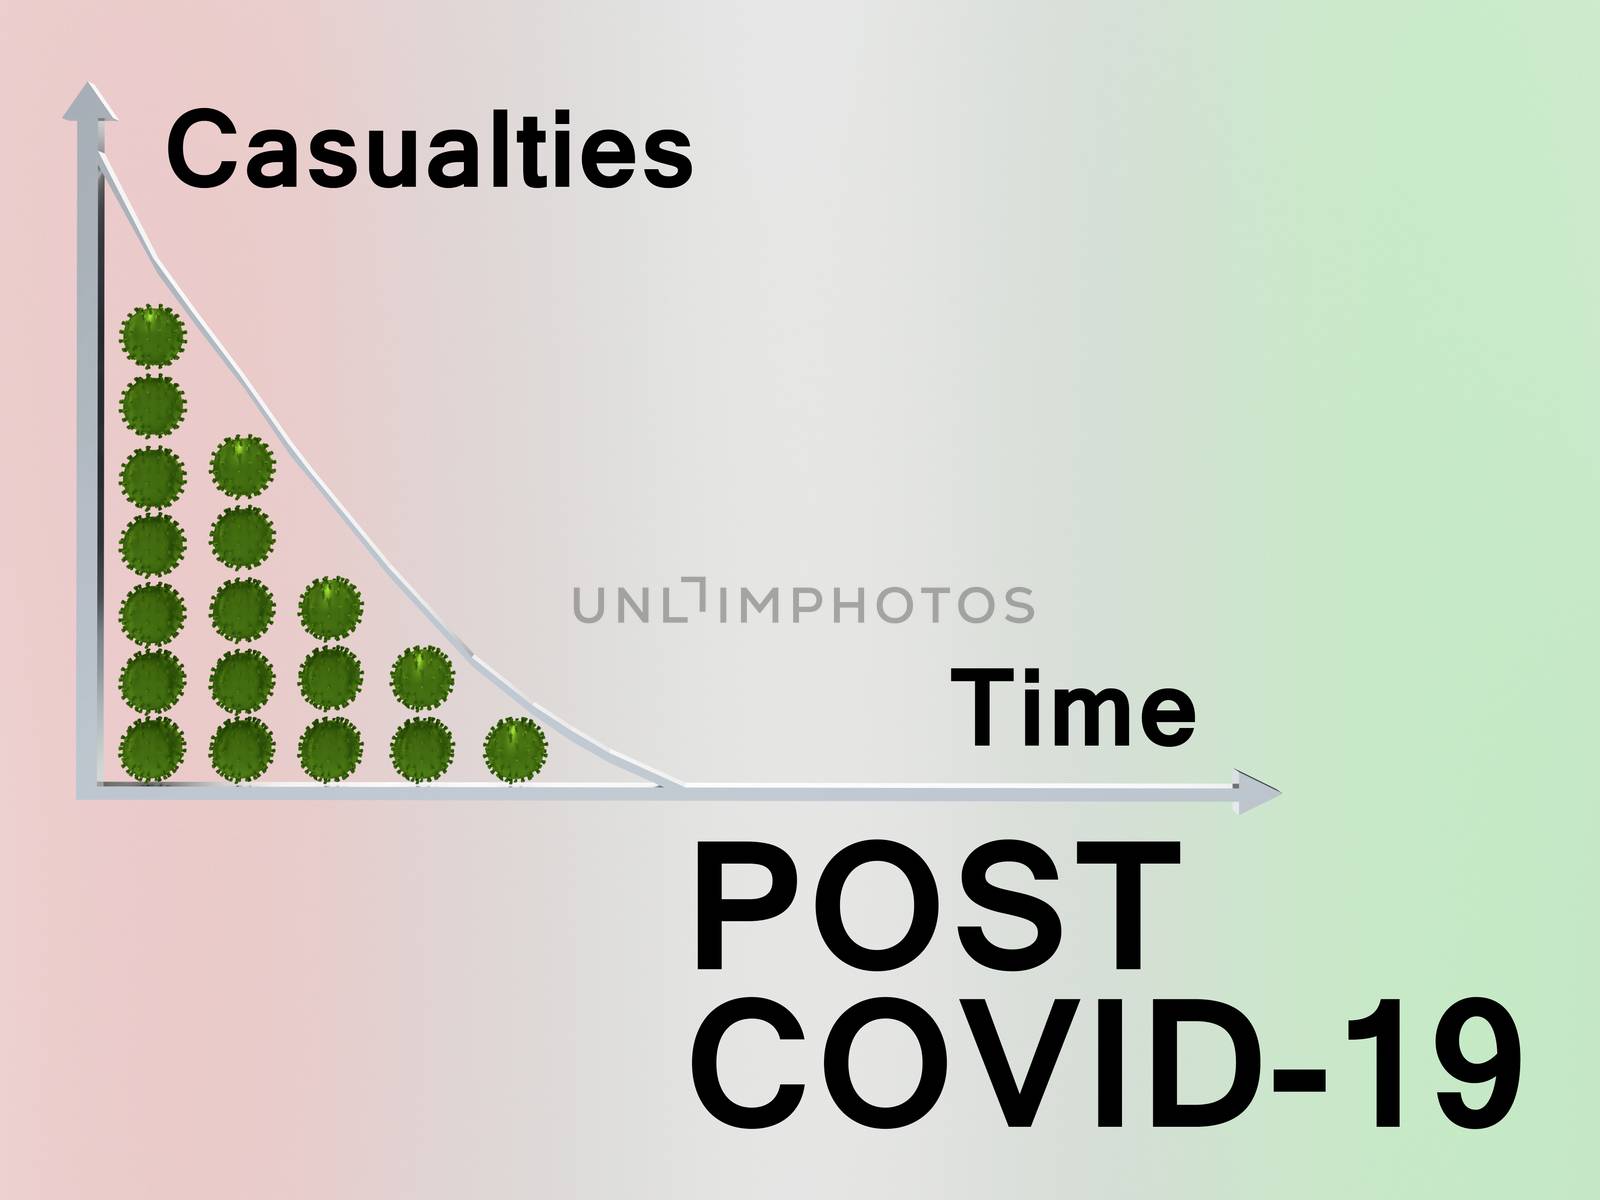 3D illustration of POST COVID-19 script over a graph of casualties reduced to zero, isolated on pale colored backgrond. 